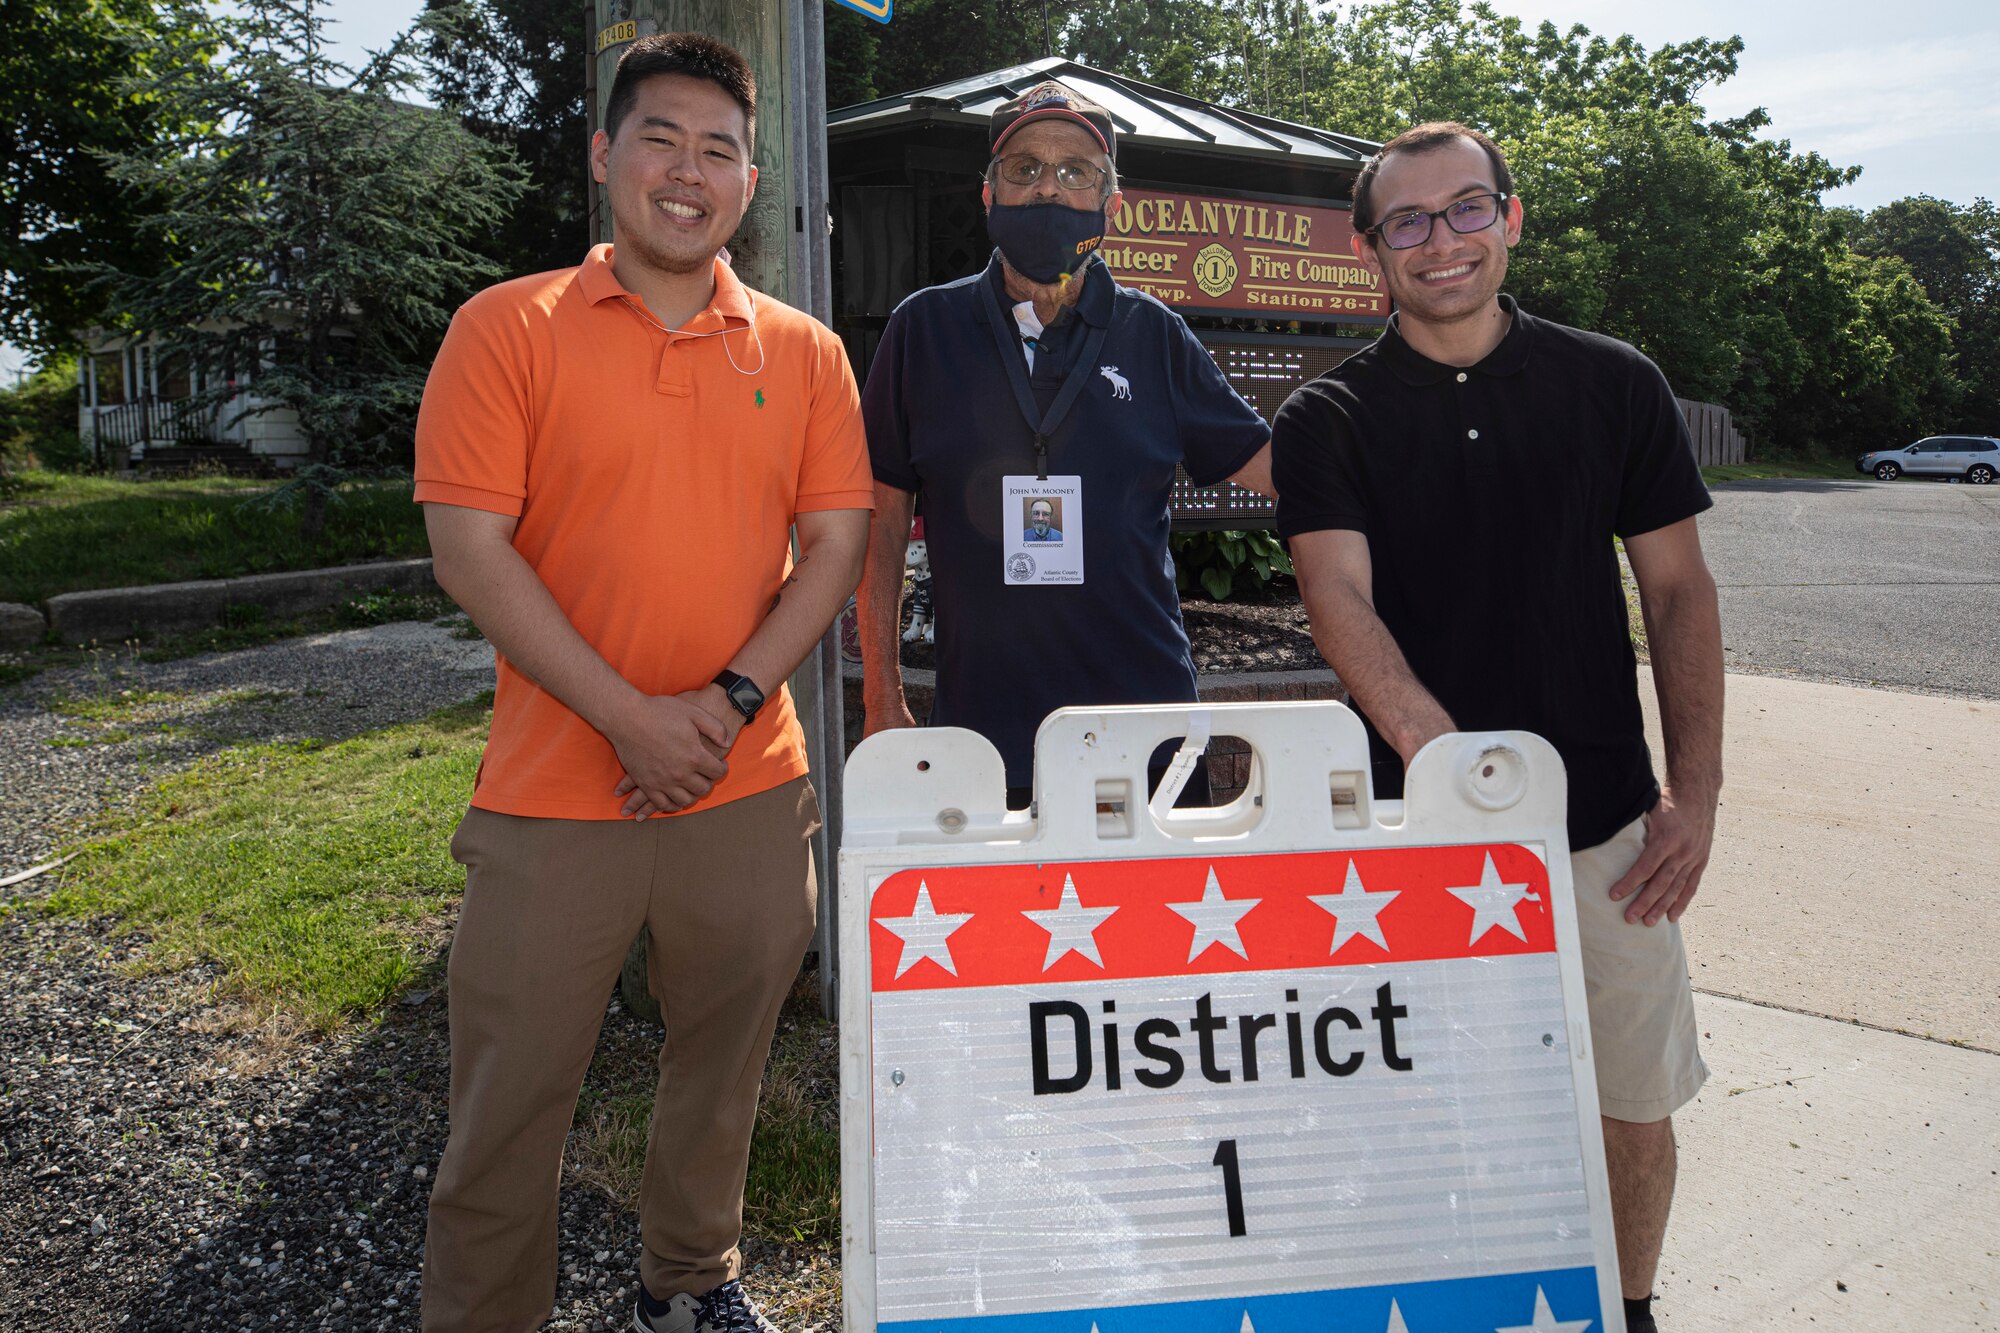 U.S. Air Force 1st Lt. Johnathon Kim, 177th Medical Group, left, John W. Mooney, Commissioner, Atlantic County Board of Elections, and Airman 1st Class Angel Castillo, 177th Aircraft Maintenance Squadron stand for a portrait in front of the Oceanville Volunteer Fire Company polling site in Galloway Township, N.J., June 8, 2021.